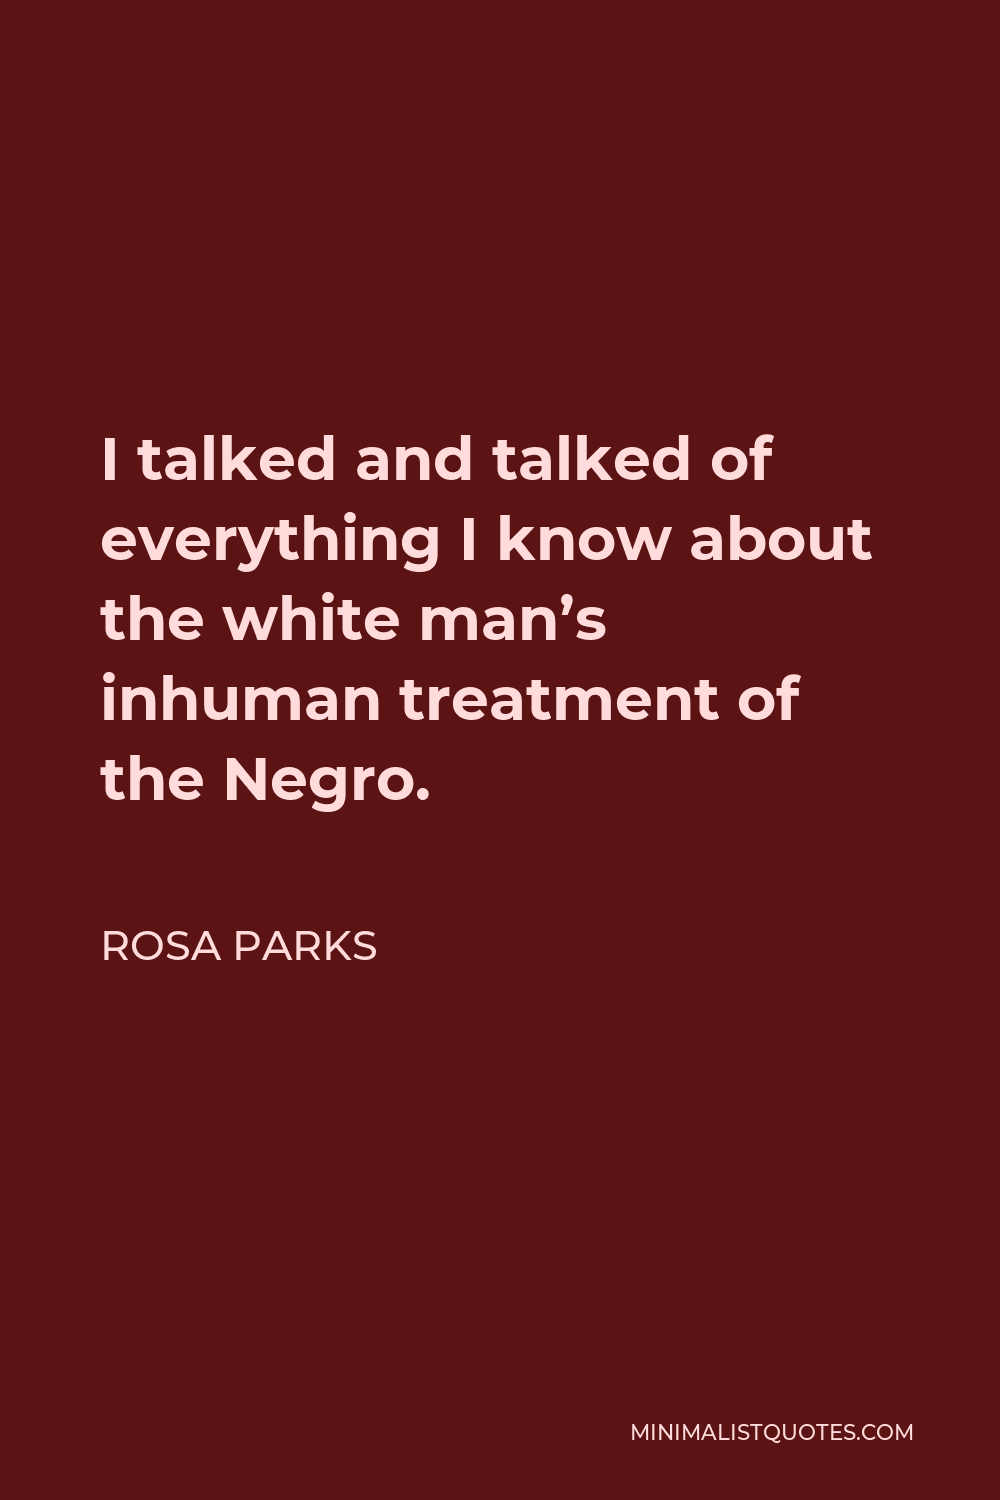 Rosa Parks Quote - I talked and talked of everything I know about the white man’s inhuman treatment of the Negro.